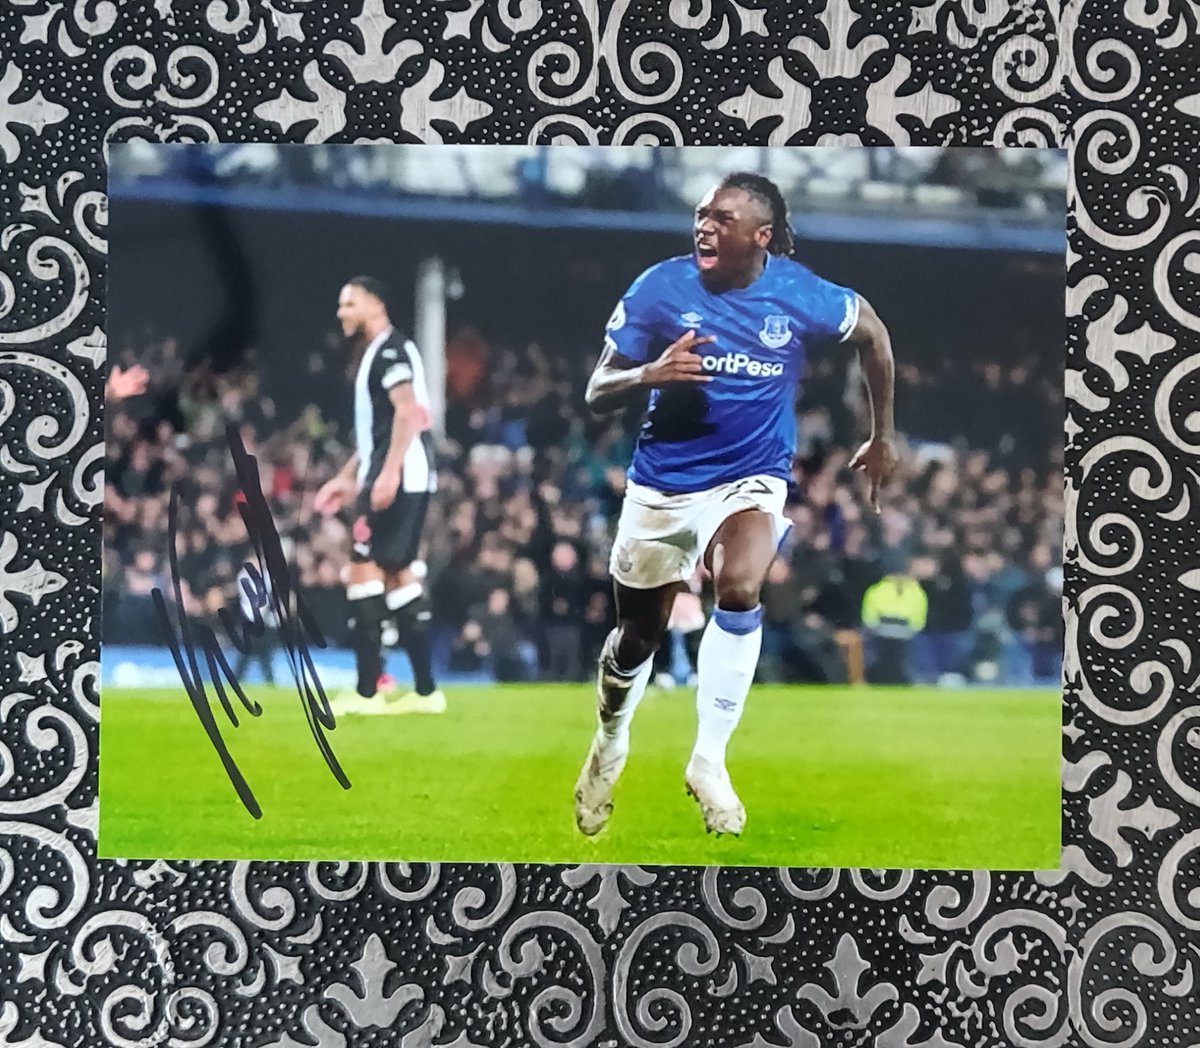 🚨🚨 Signed Moise Kean Picture🚨🚨 To be in with a chance of winning, simply RT this tweet. Winner picked at random Competition closes at 2pm today #UHTPodcast #EFC #COYB #Everton #Kean #Golazo